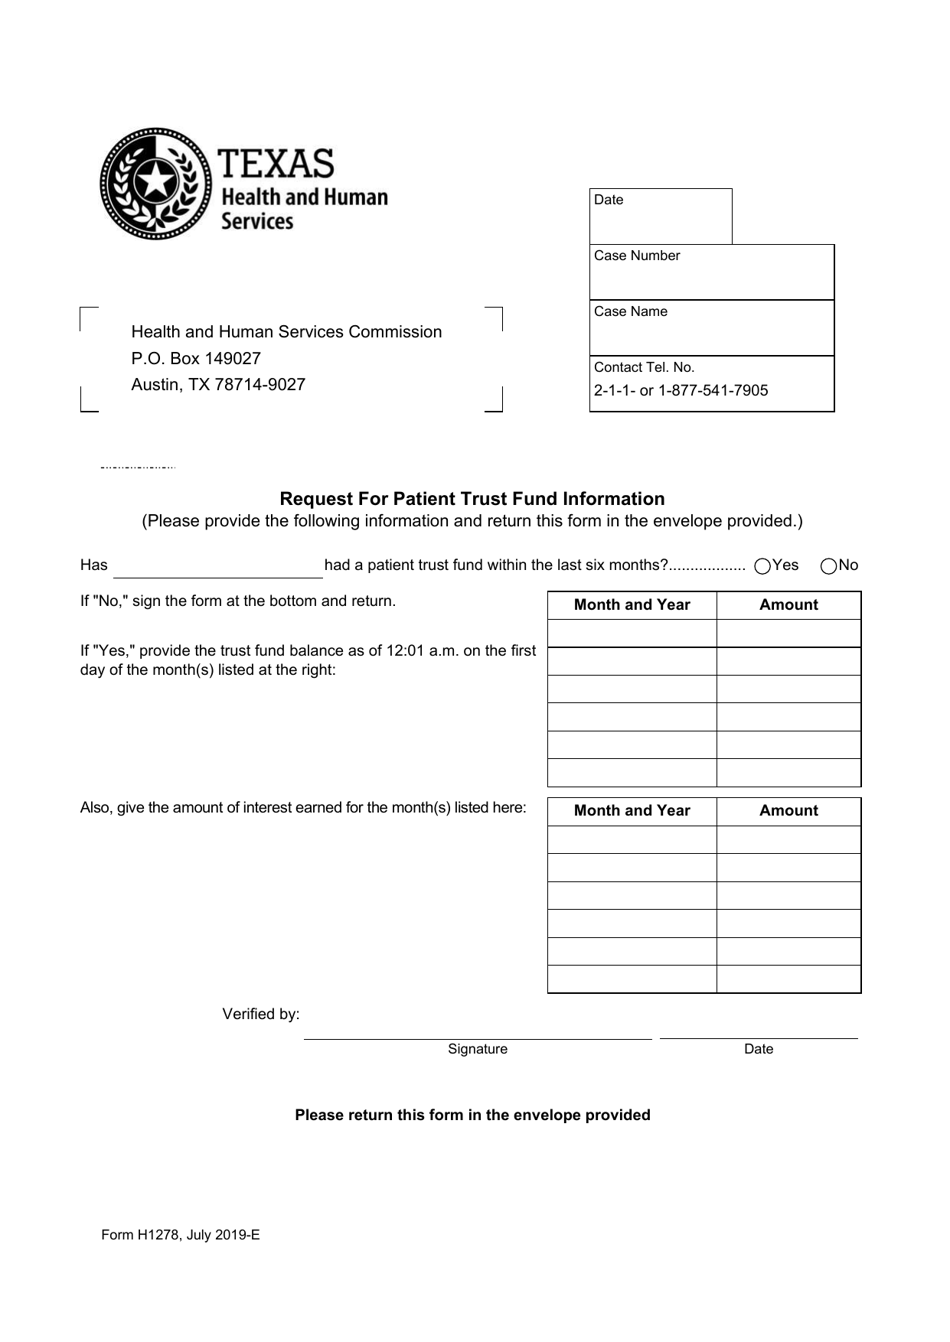 Form H1278 Request for Patient Trust Fund Information - Texas, Page 1